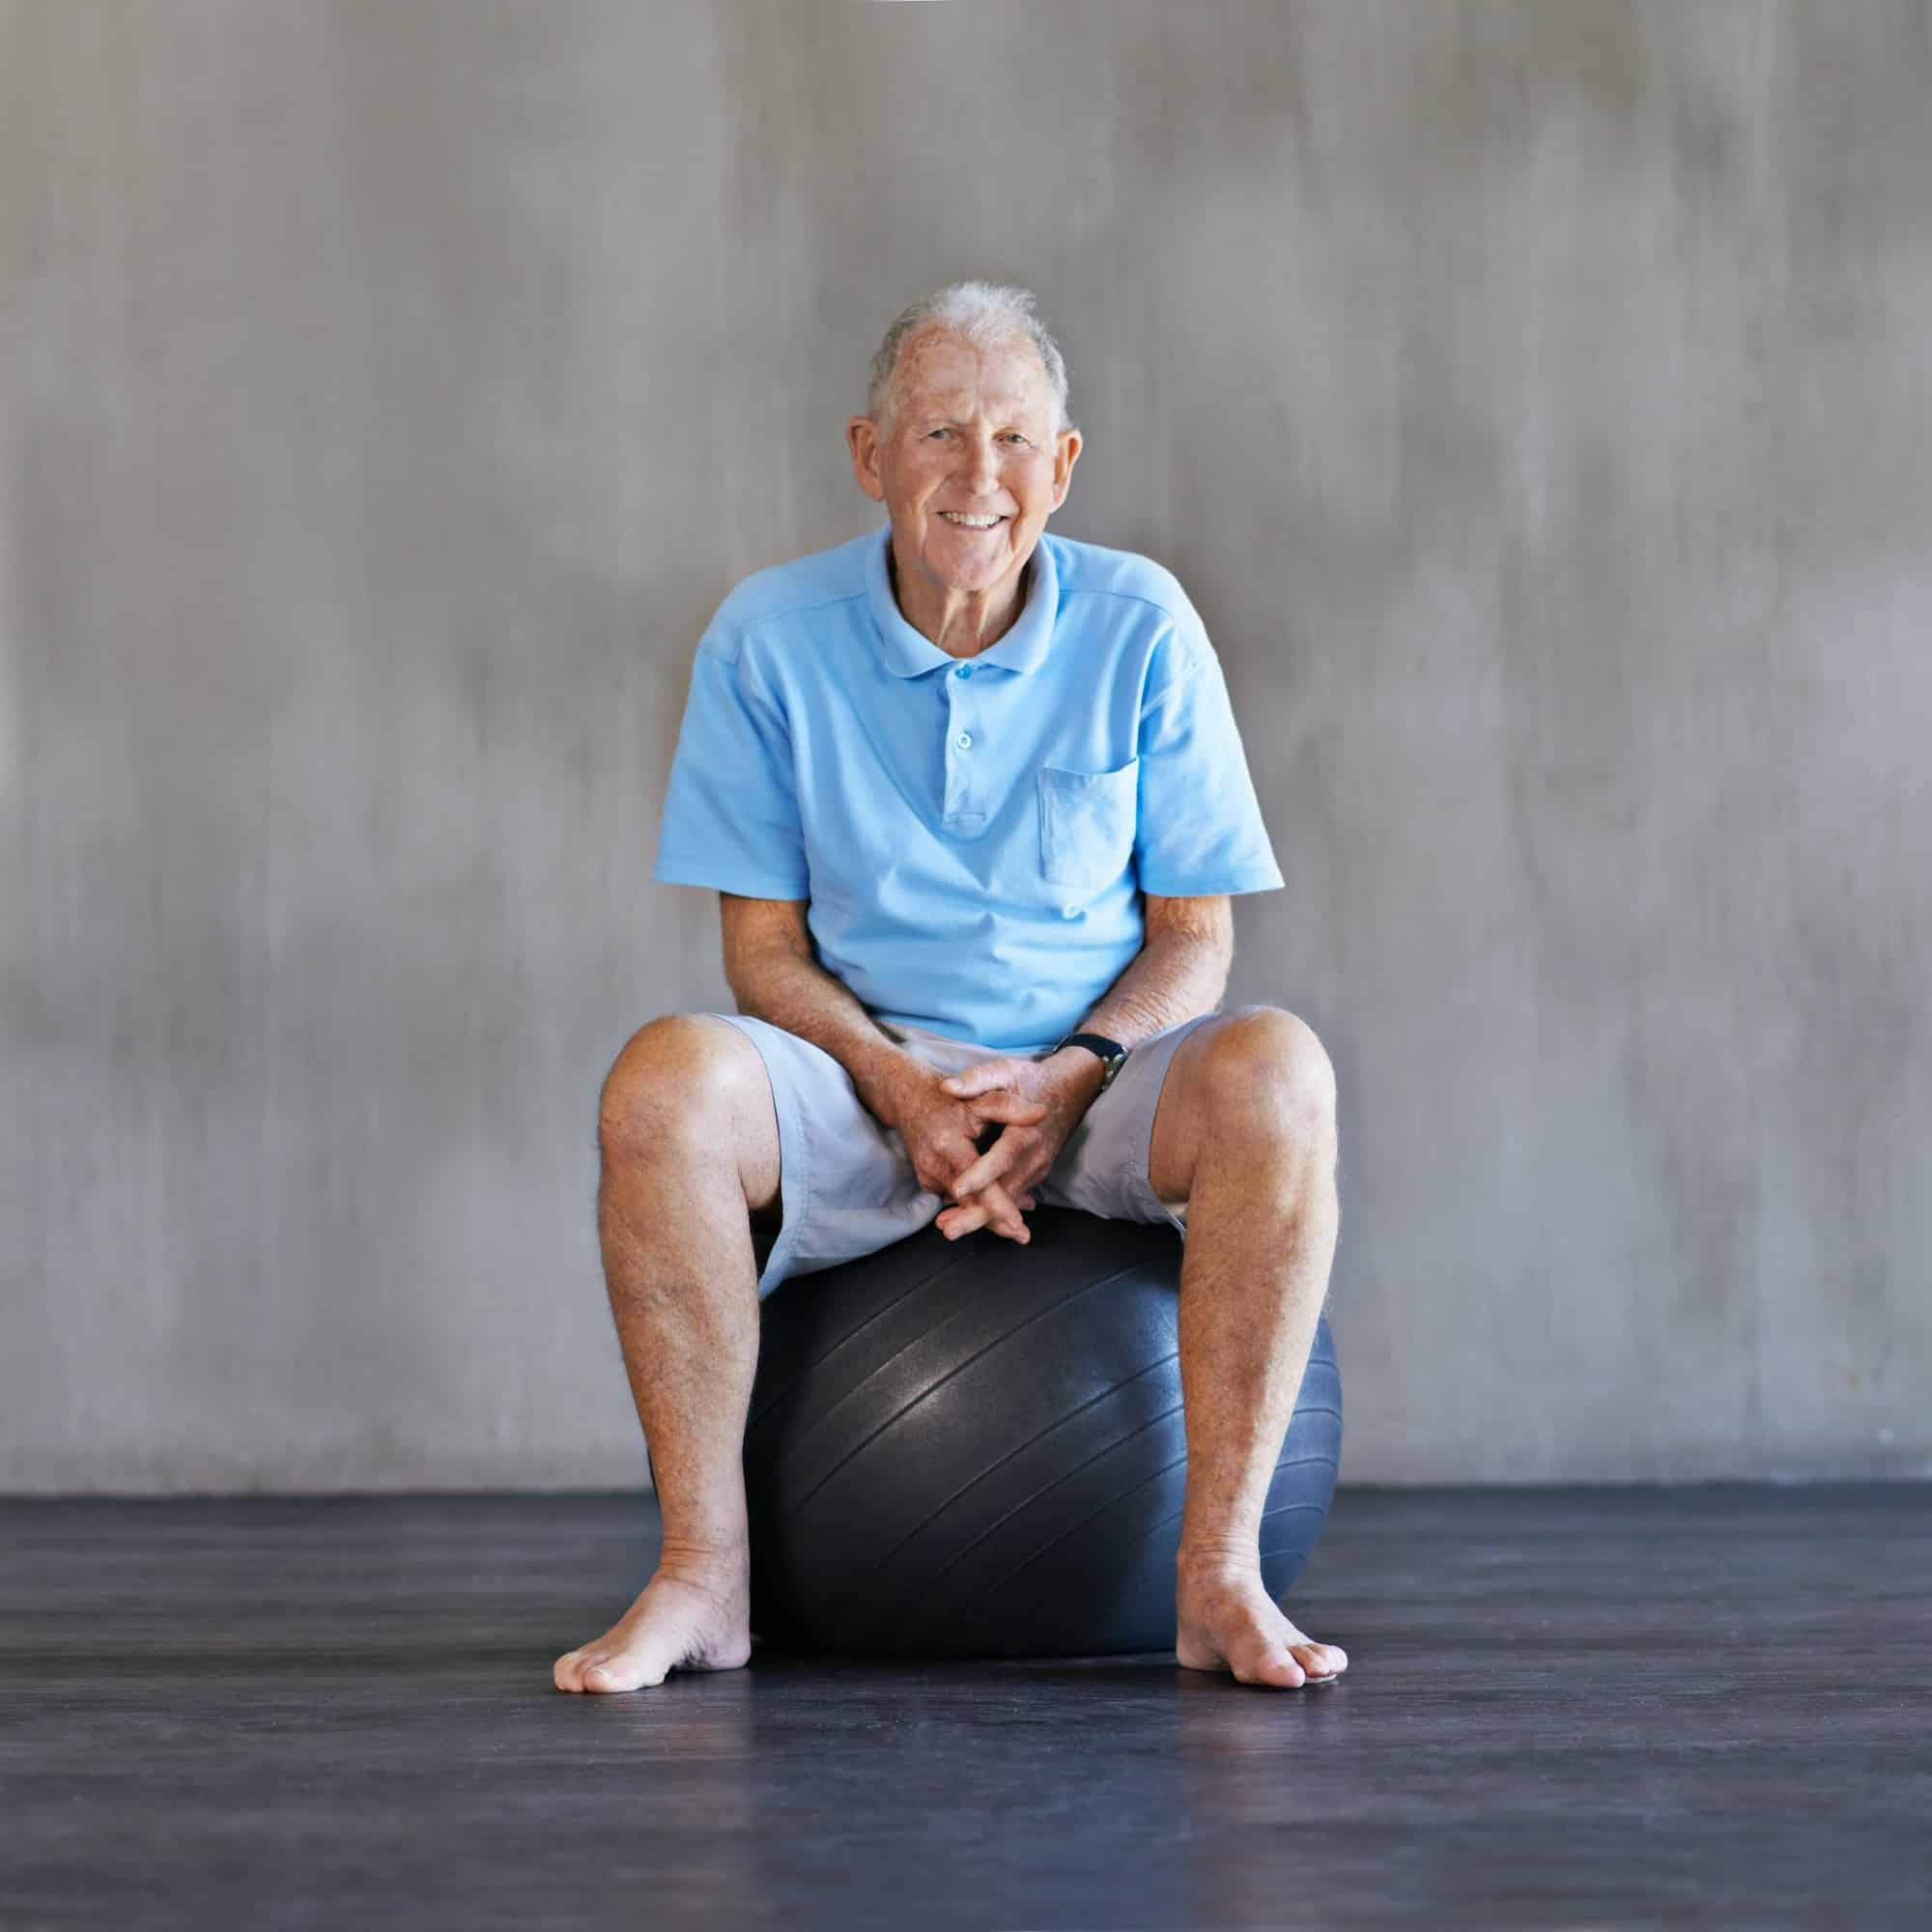 Staying active and happy. Shot of a senior man at a physical therapy session.